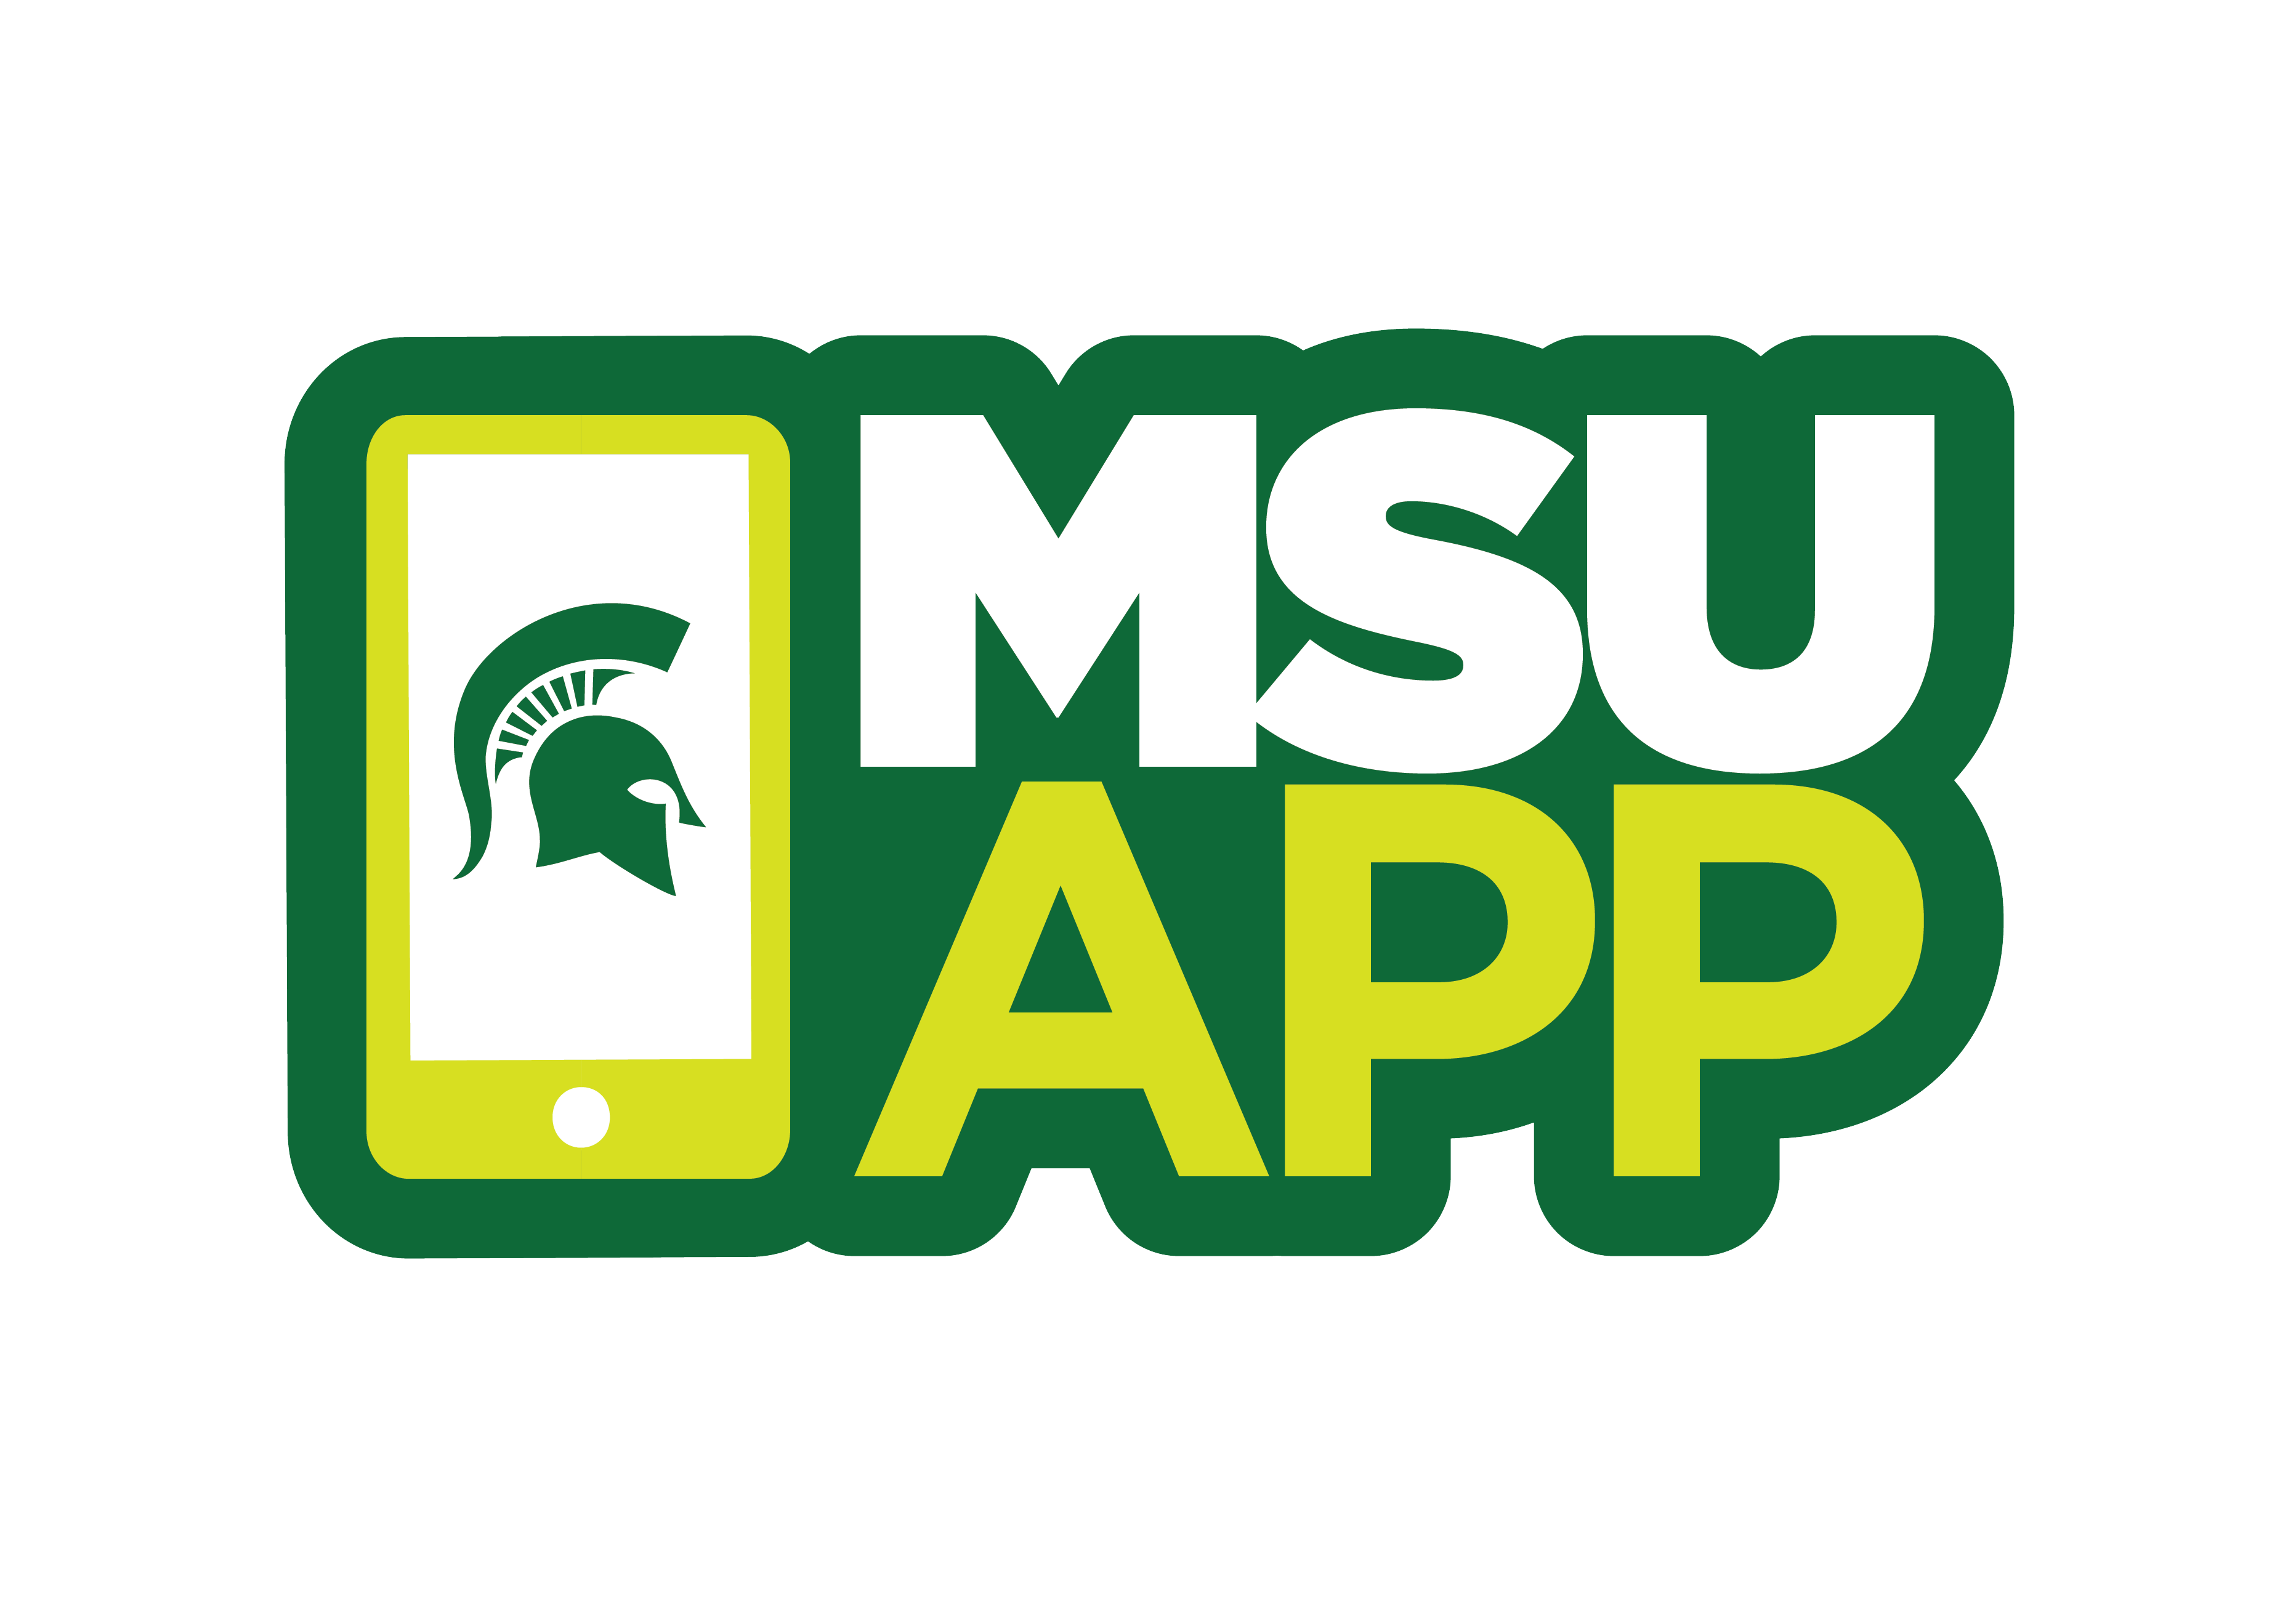 The MSU App logo (a mobile phone next to text that reads "MSU App"